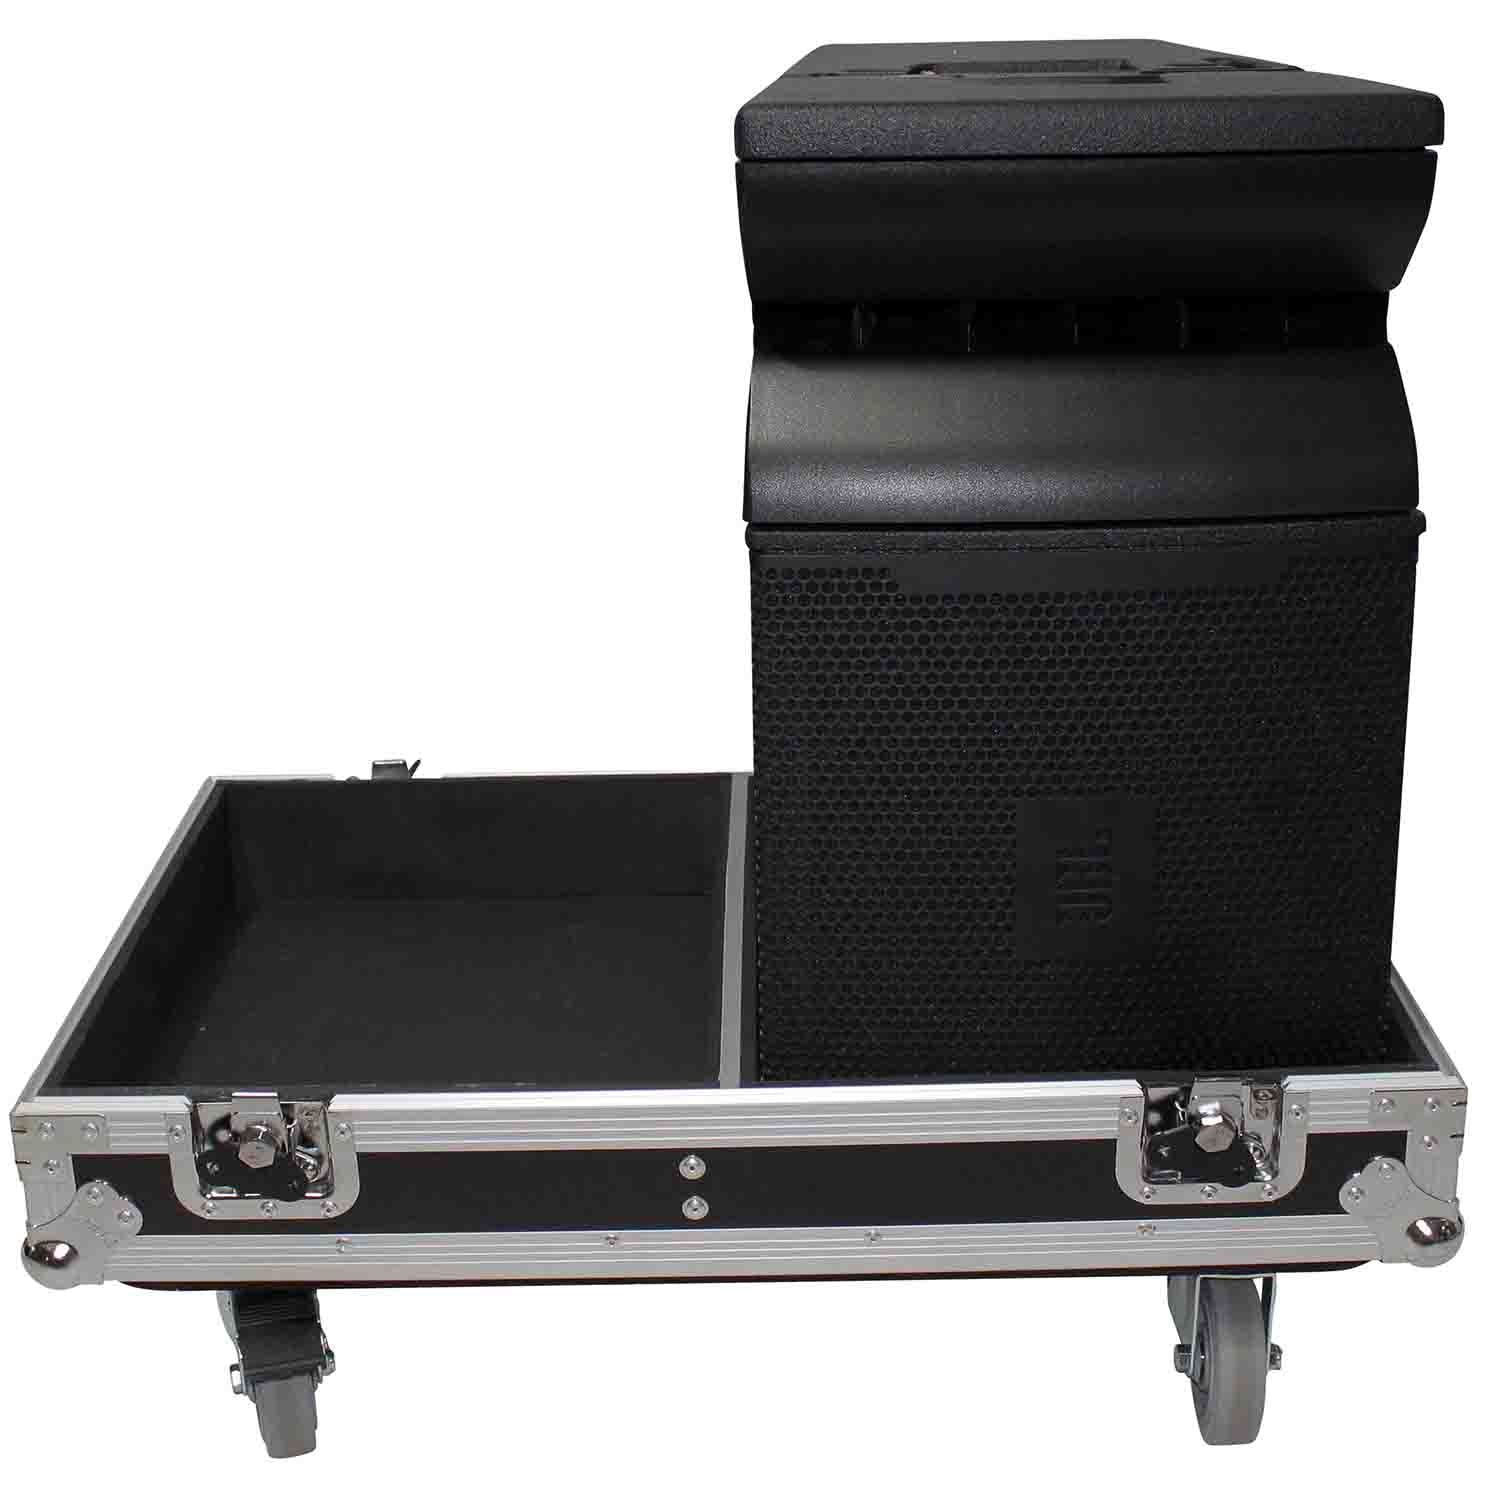 ProX X-JBL-VRX932LAP Fight Case for 2 JBL VRX932LAP Line Array Speakers with 4-inch Casters - Hollywood DJ